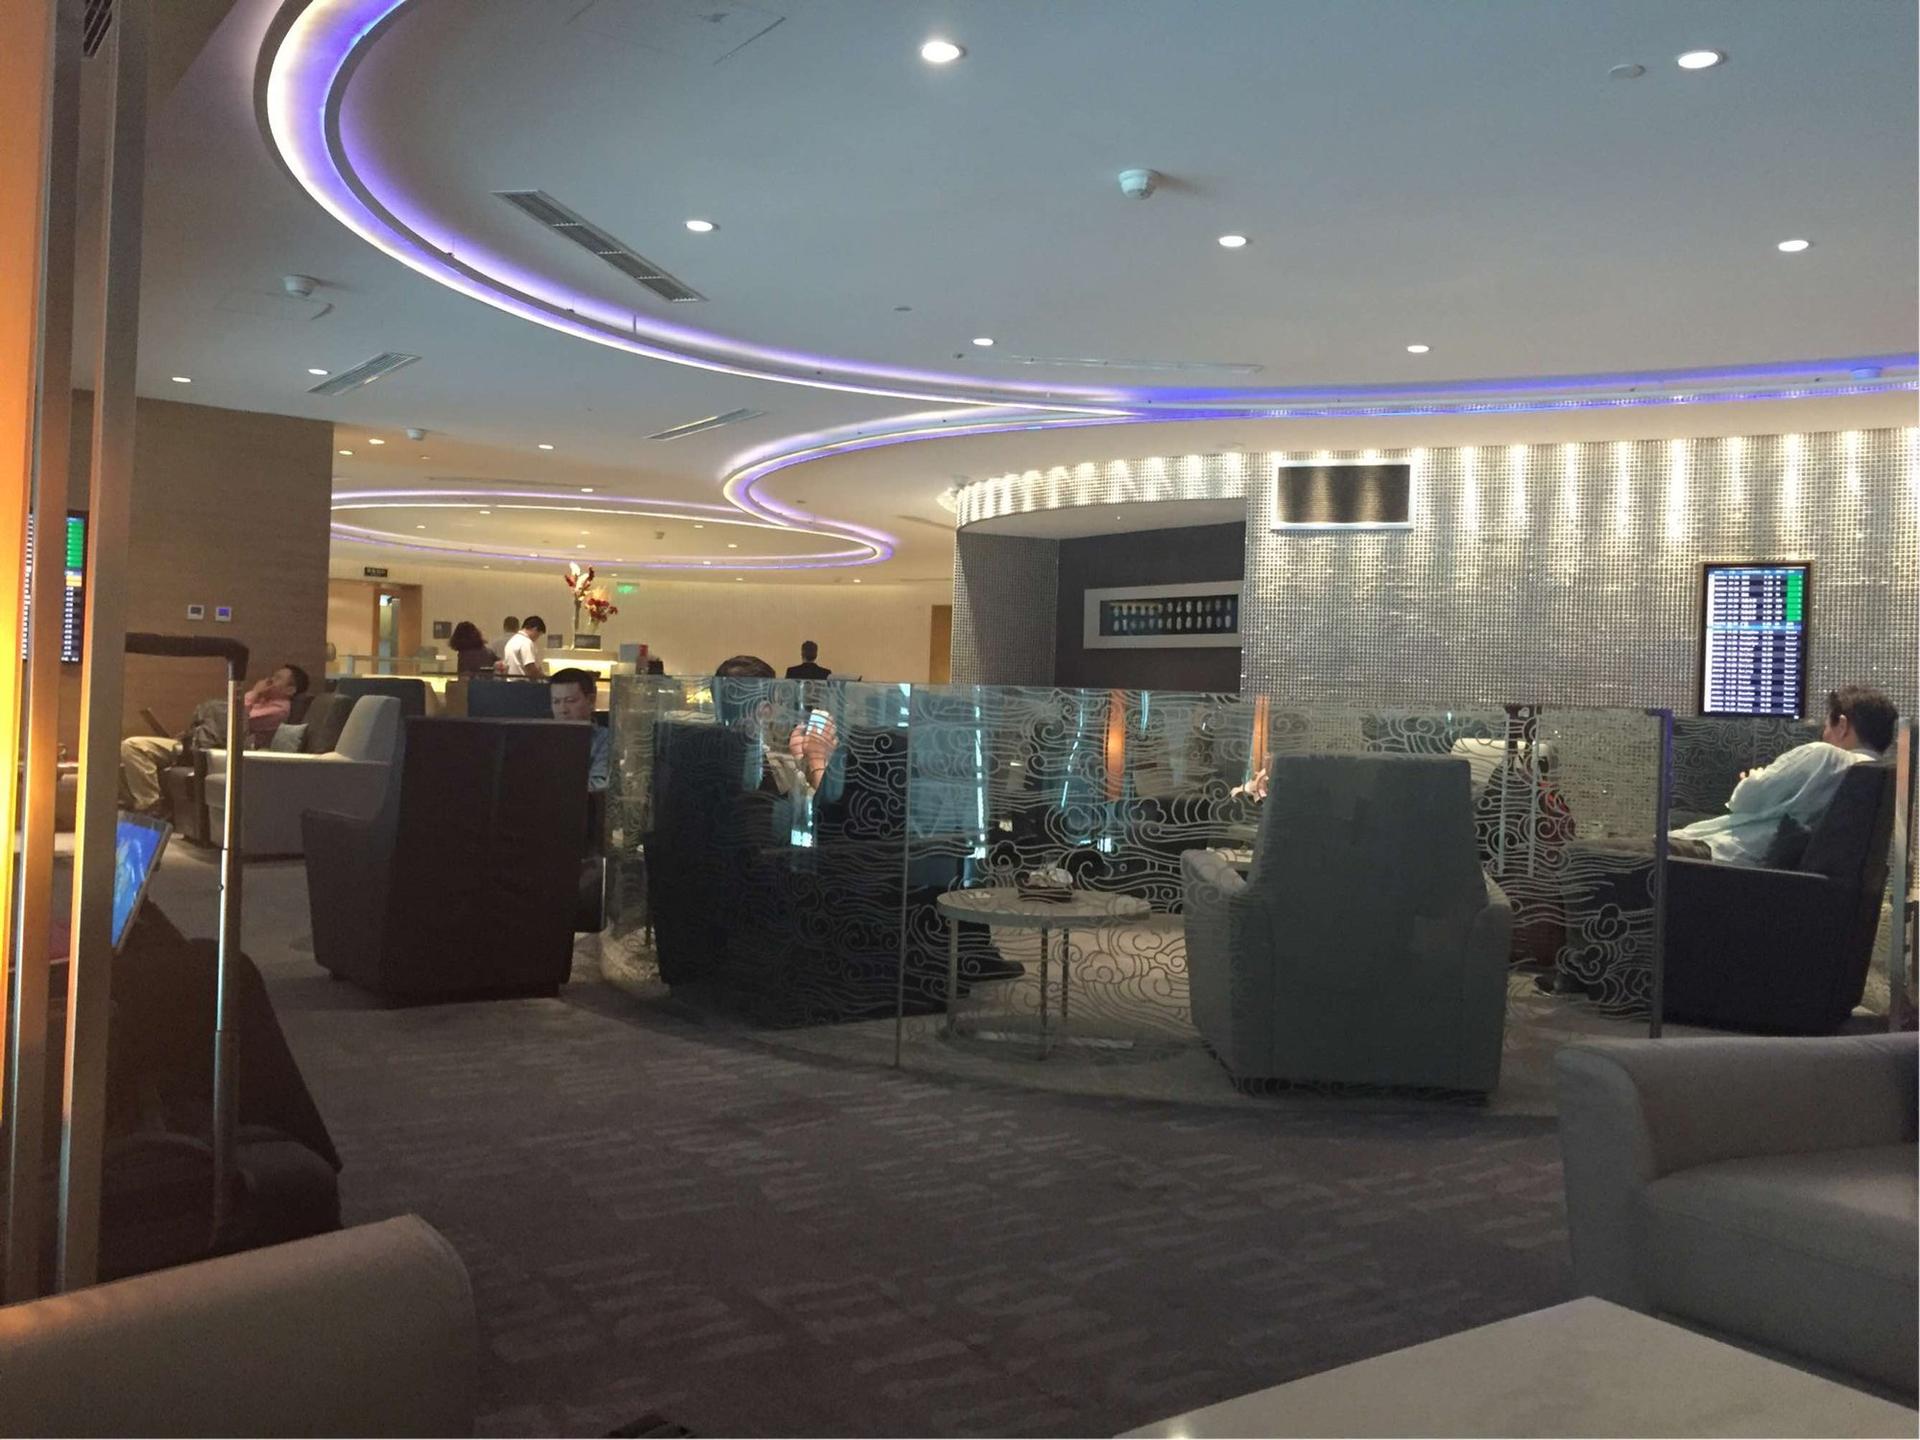 Air China Domestic First & Business Class Lounge image 2 of 5